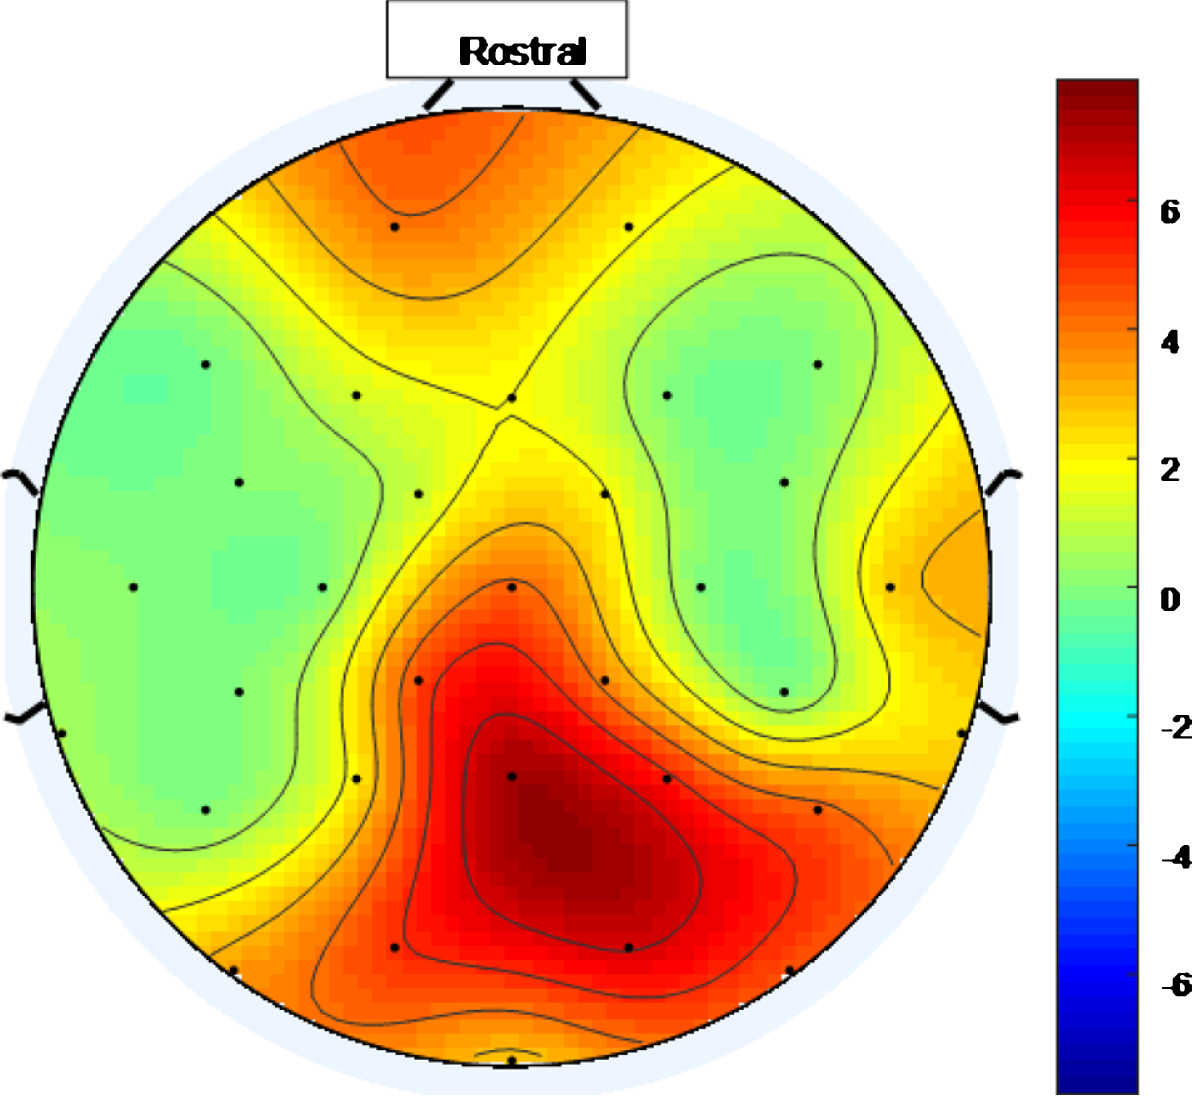 Scalp map for high intensity 40 Hz stimulus for healthy volunteer 1. Areas represented by colors above 0 on the color bar represent a 40 Hz entrainment response with values that are higher on the color scale having 40 Hz peaks that are higher above the average PSD value in the 25 Hz–45 Hz range.